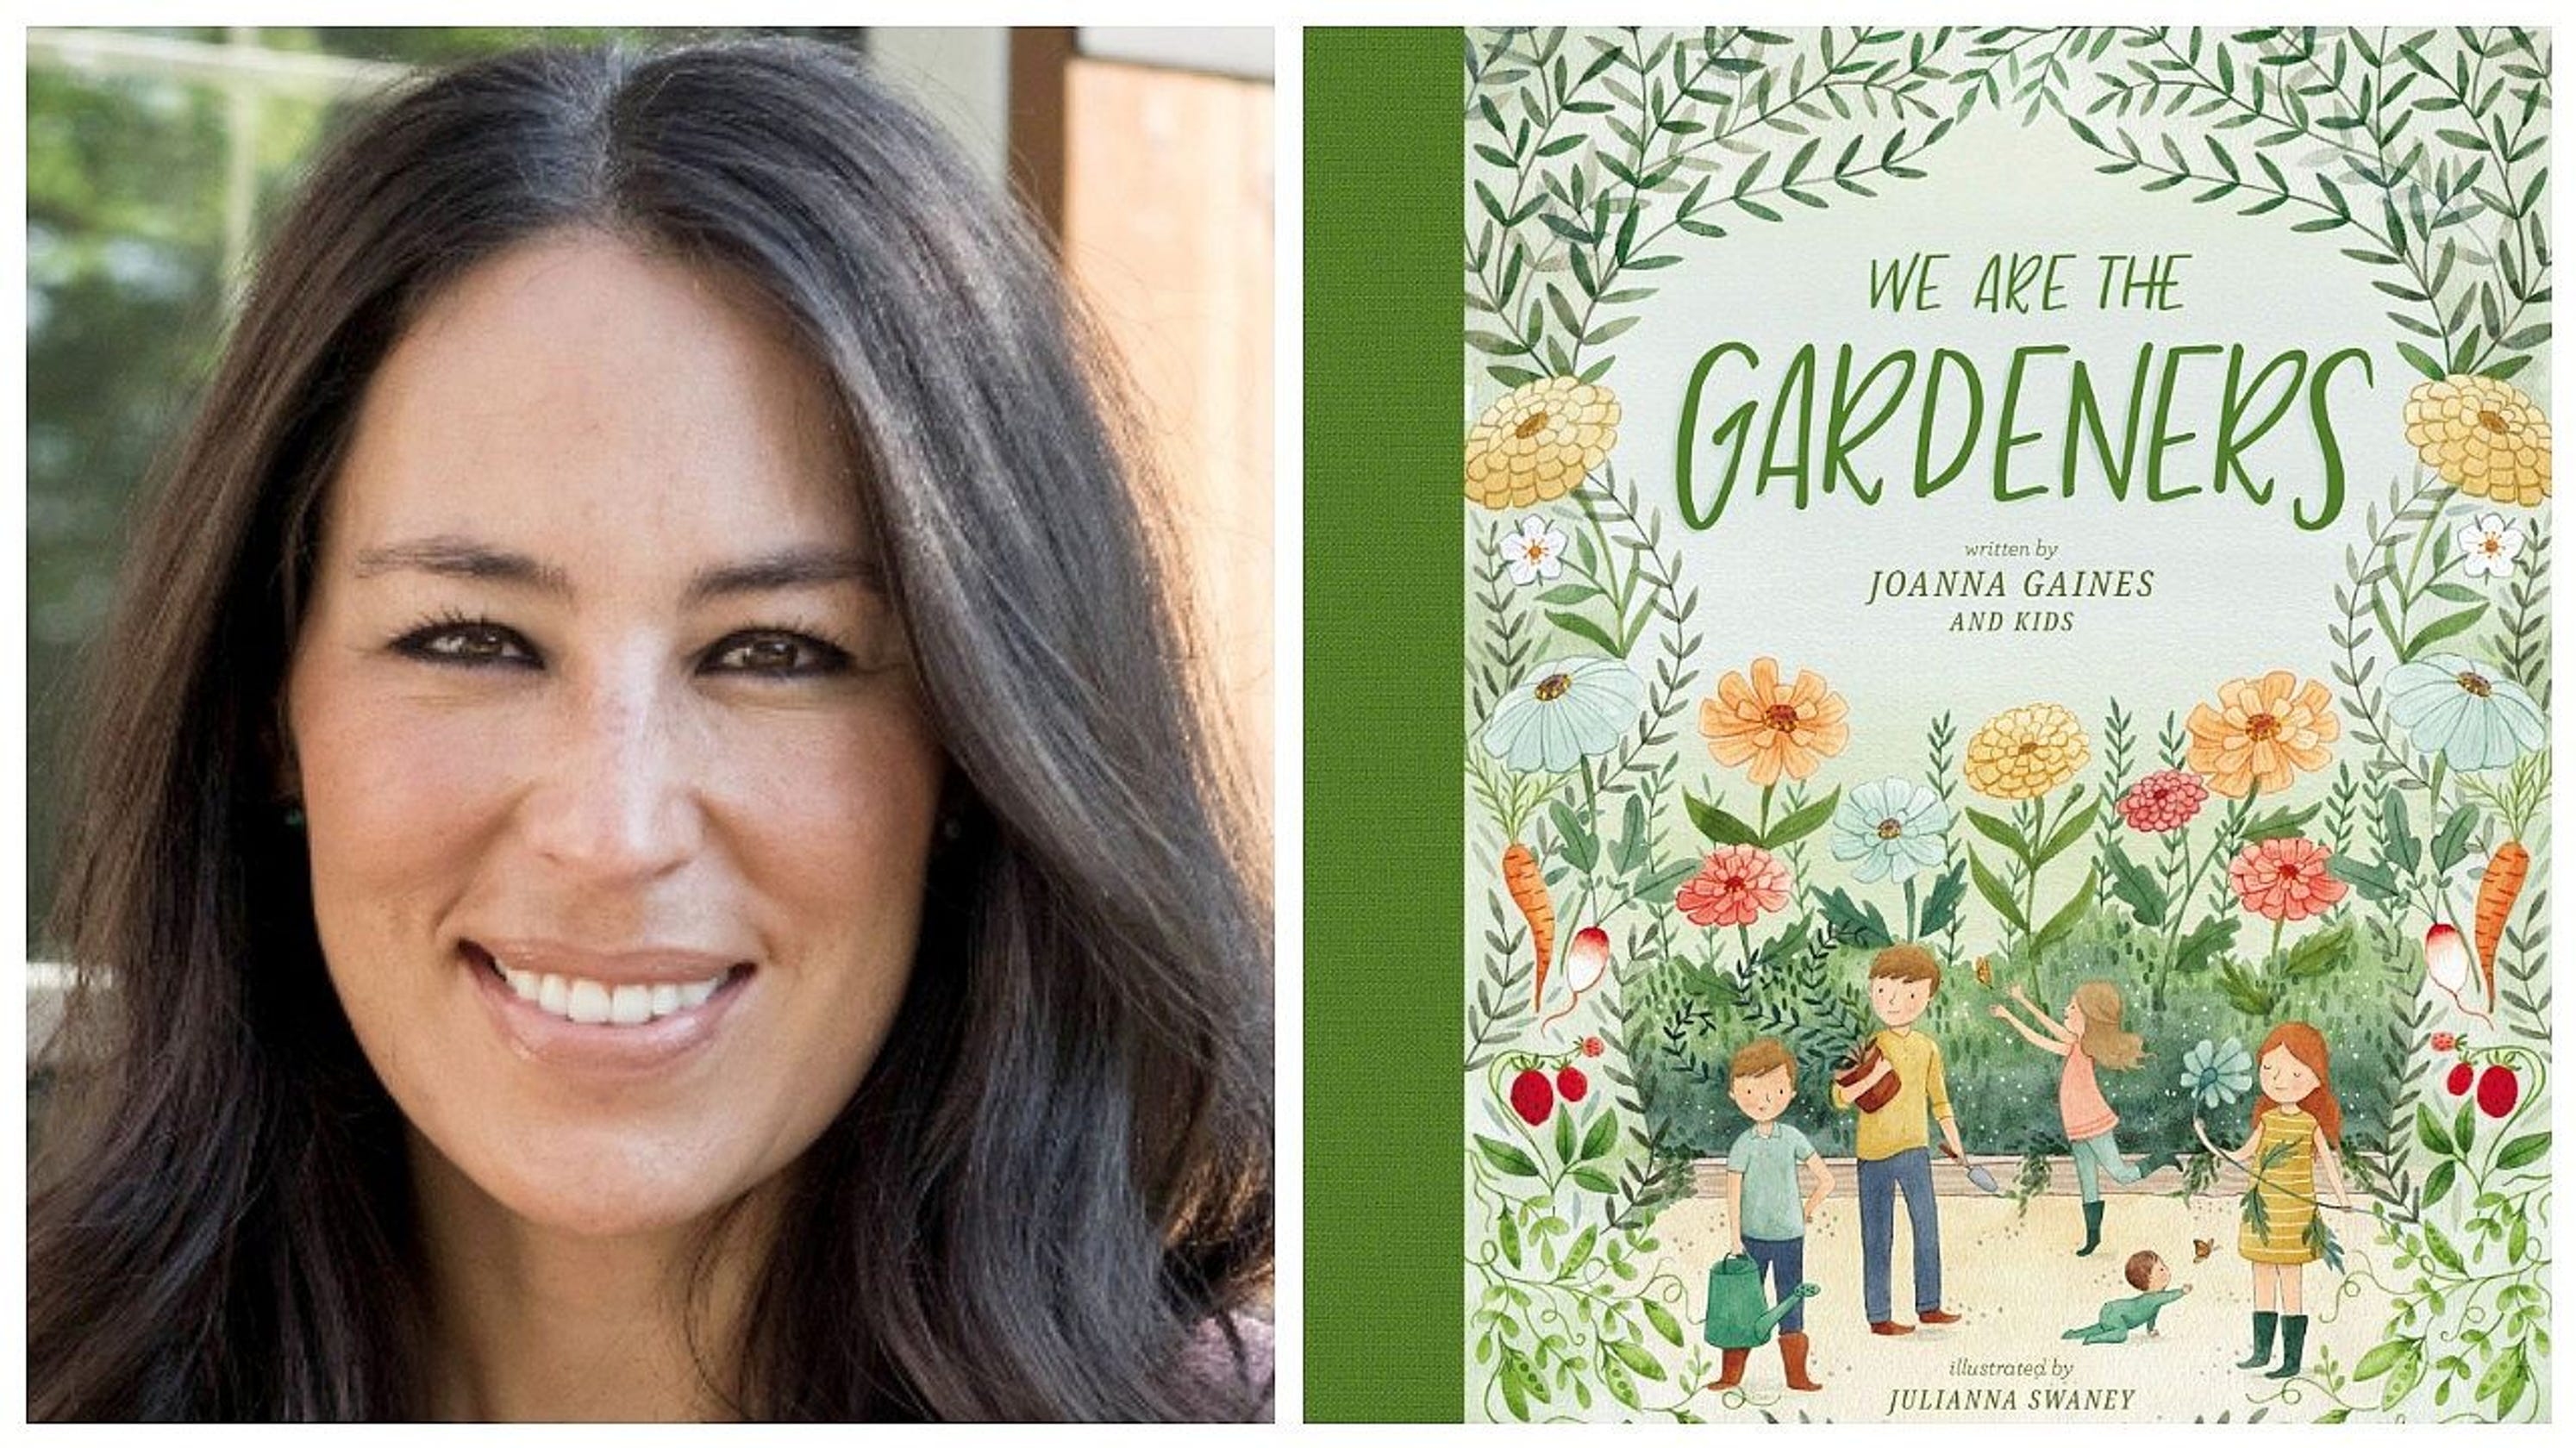 Gaines wrote "We are the Gardeners" and her children are credited...